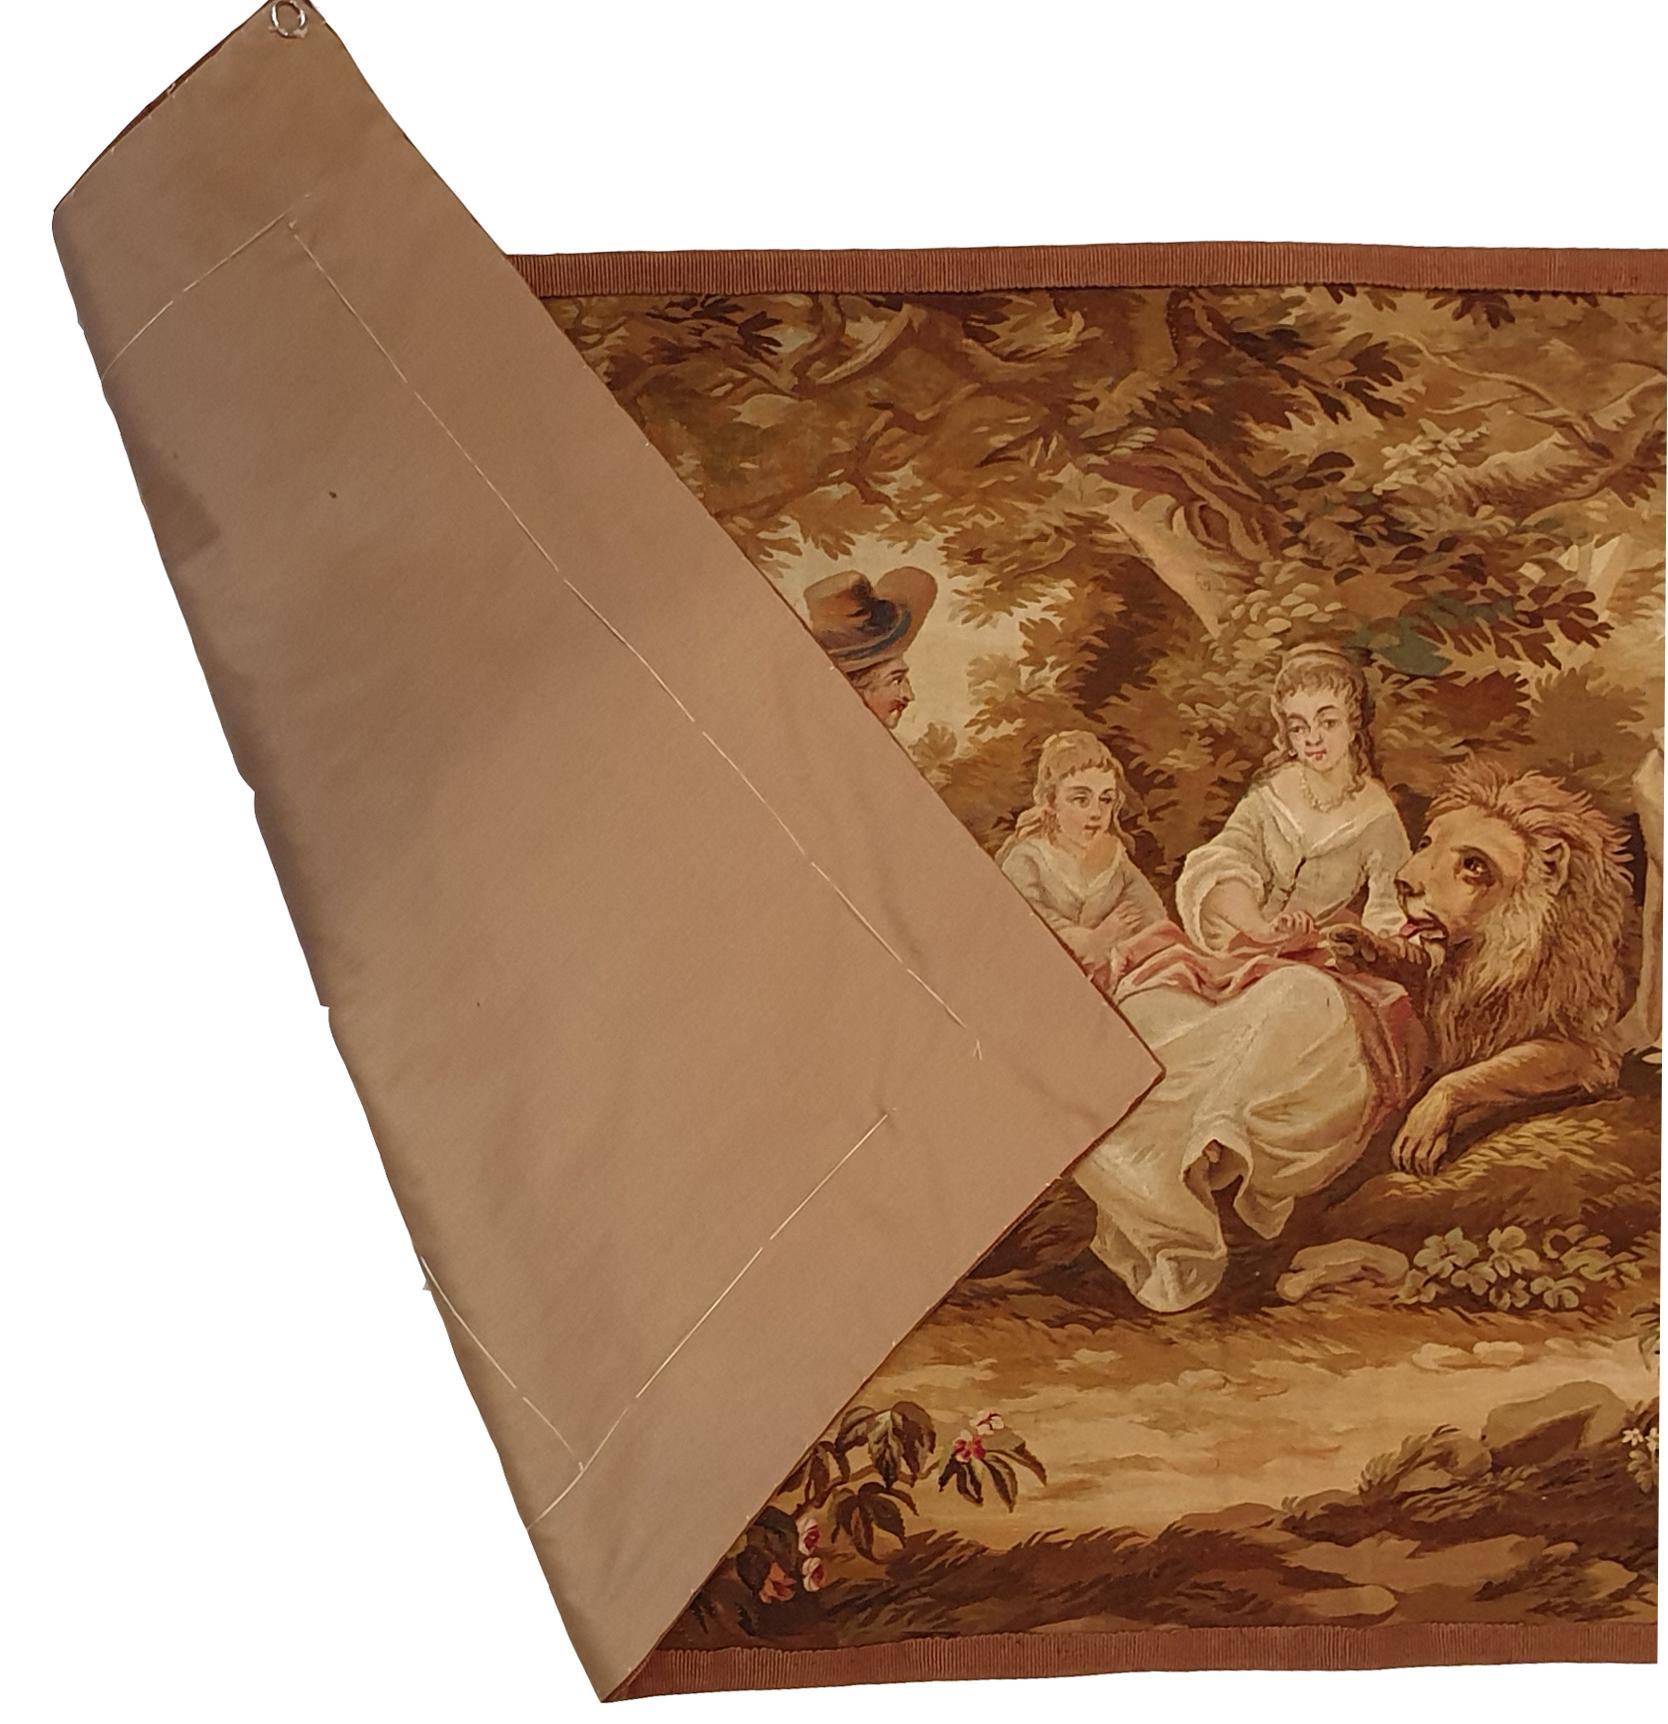  Tapestry Brussels, 19th Century - N° 704 For Sale 2